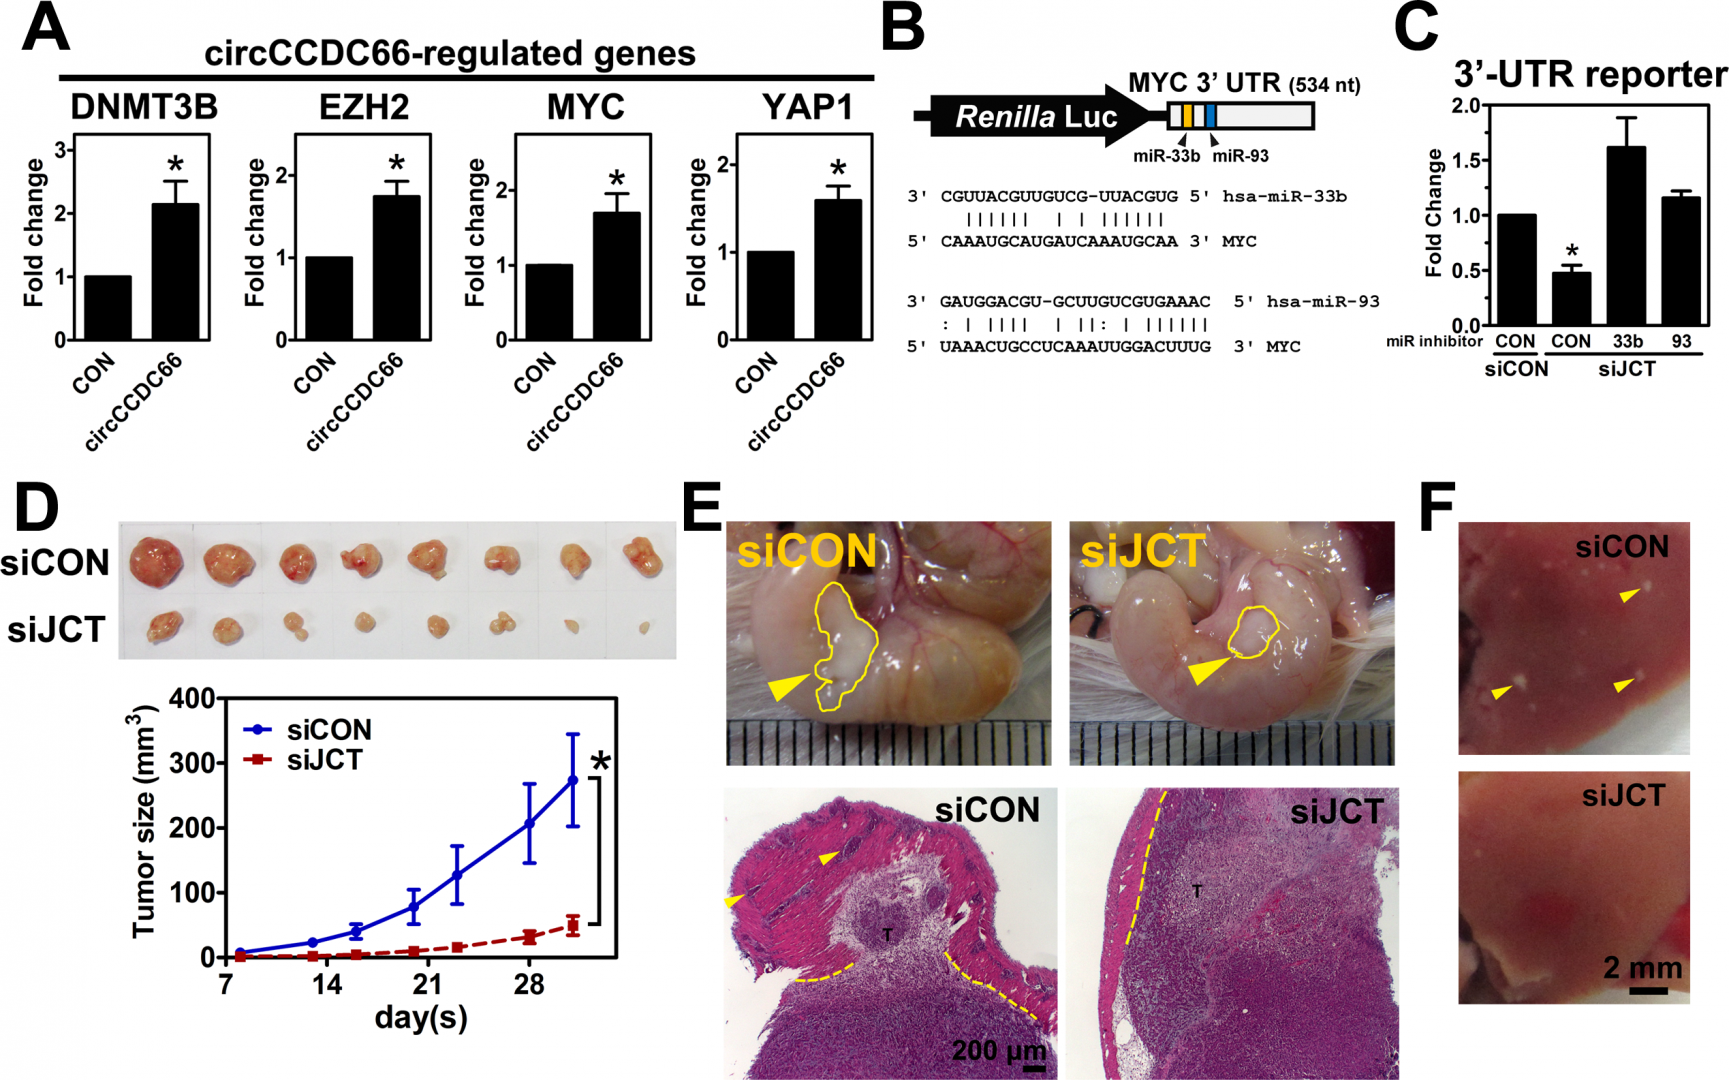 The oncogenic roles of circCCDC66